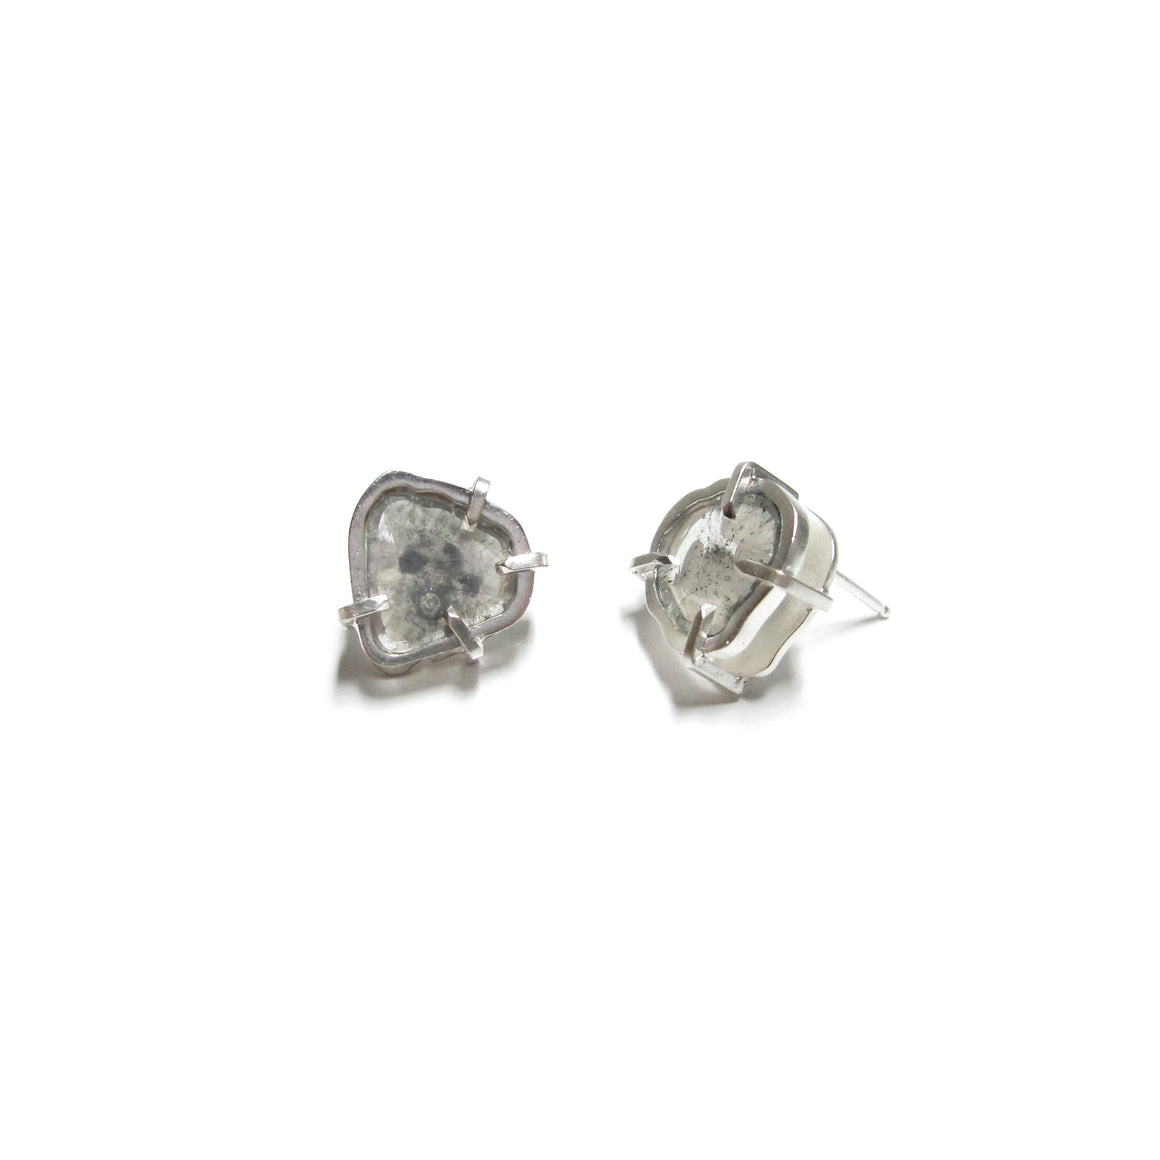 handmade, sterling silver, diamond slice, one of a kind earrings by Seth Papac